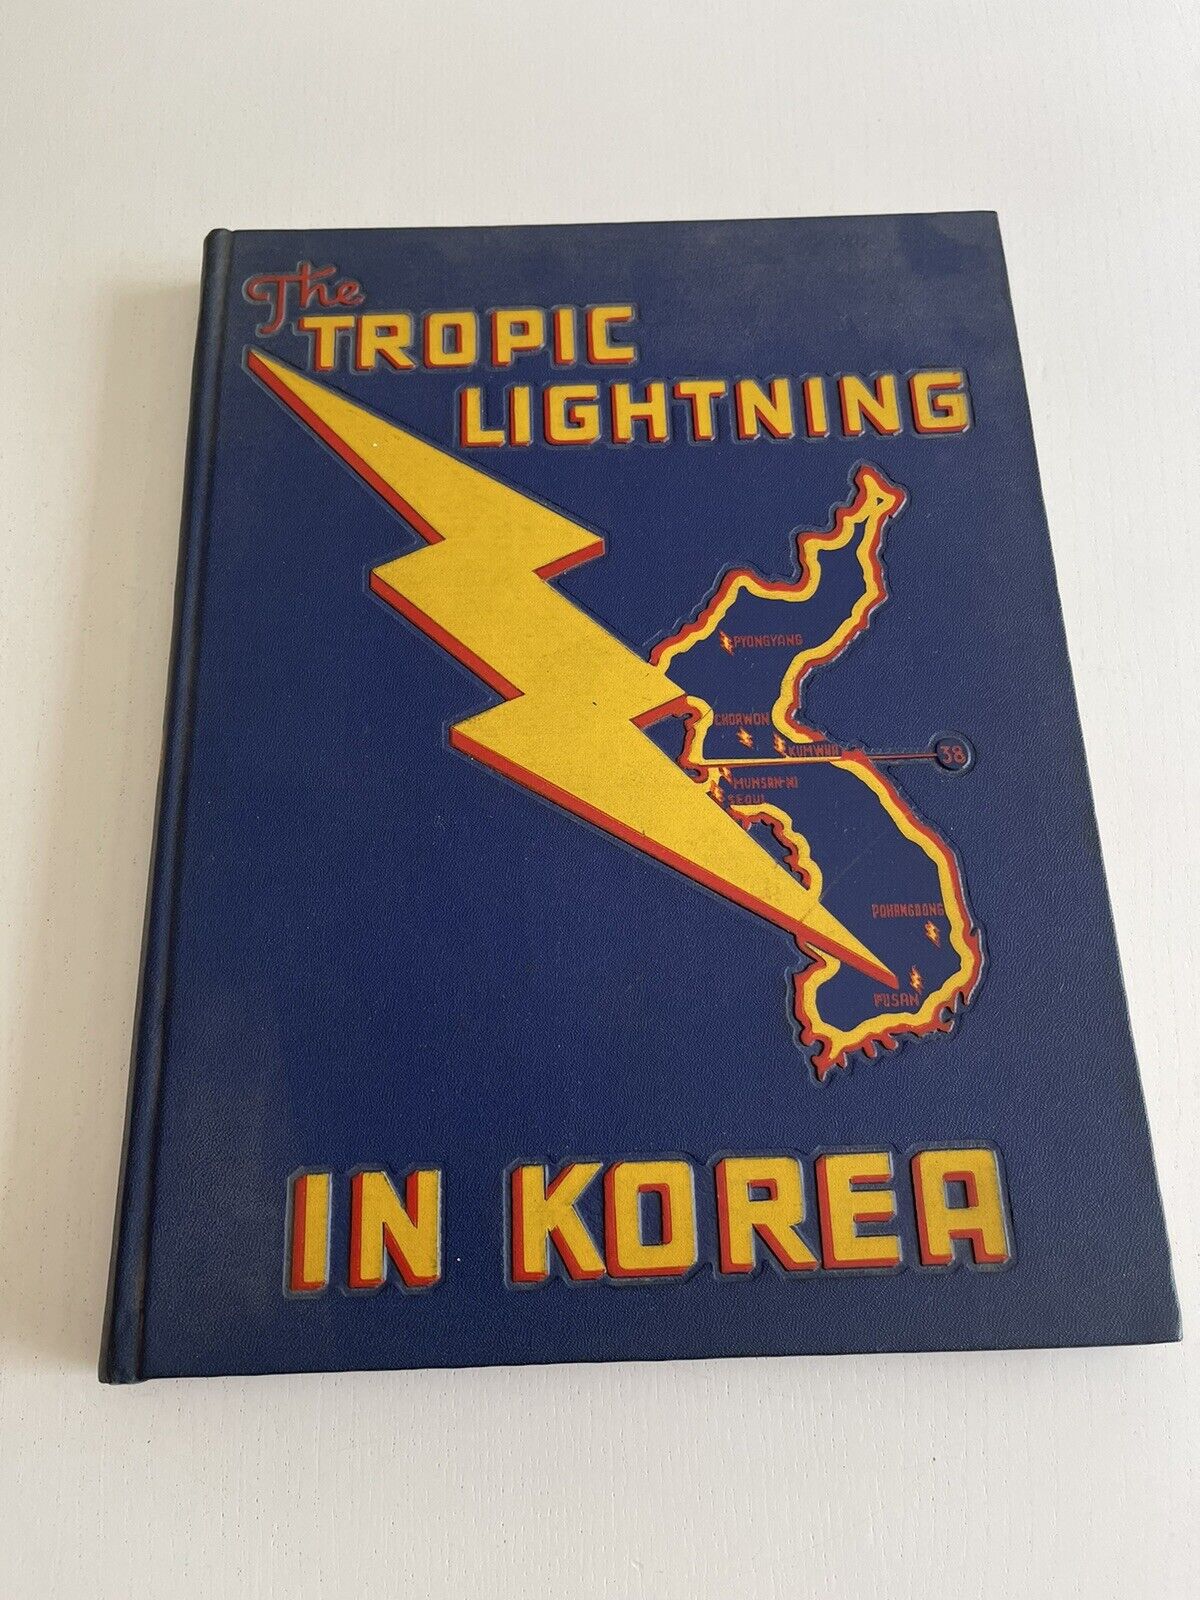 The Tropic Lightning 25th Infantry Division in Korea Unit History Book 1950-54